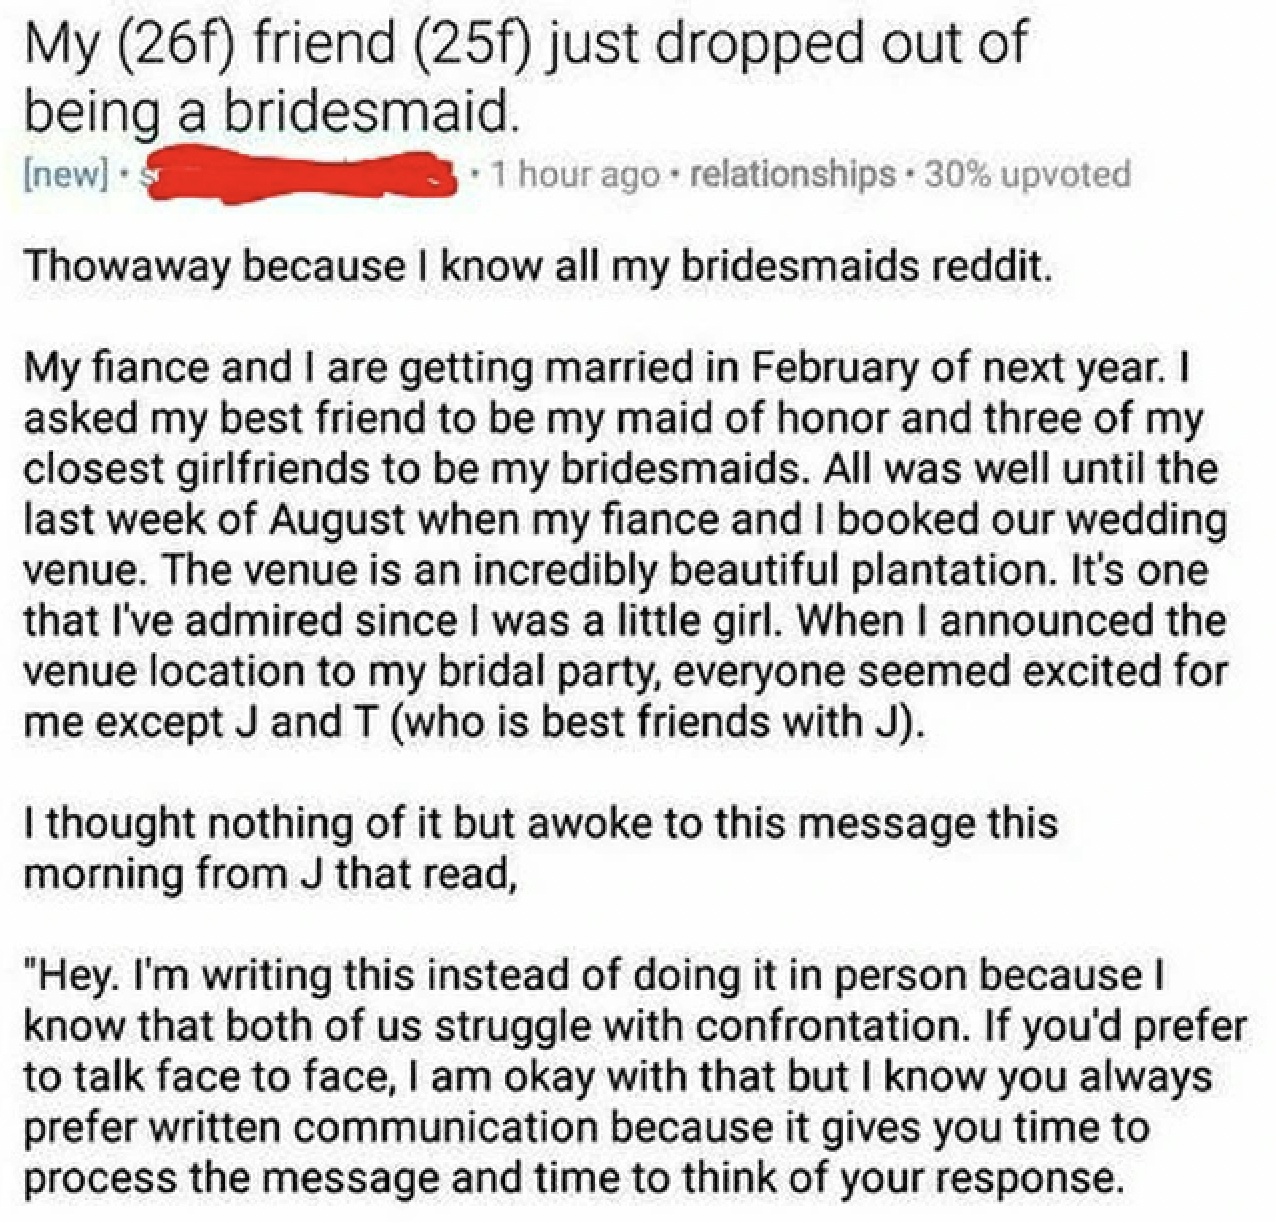 document - My 26f friend 25f just dropped out of being a bridesmaid. new 1 hour ago relationships. 30% upvoted Thowaway because I know all my bridesmaids reddit. My fiance and I are getting married in February of next year. I asked my best friend to be my